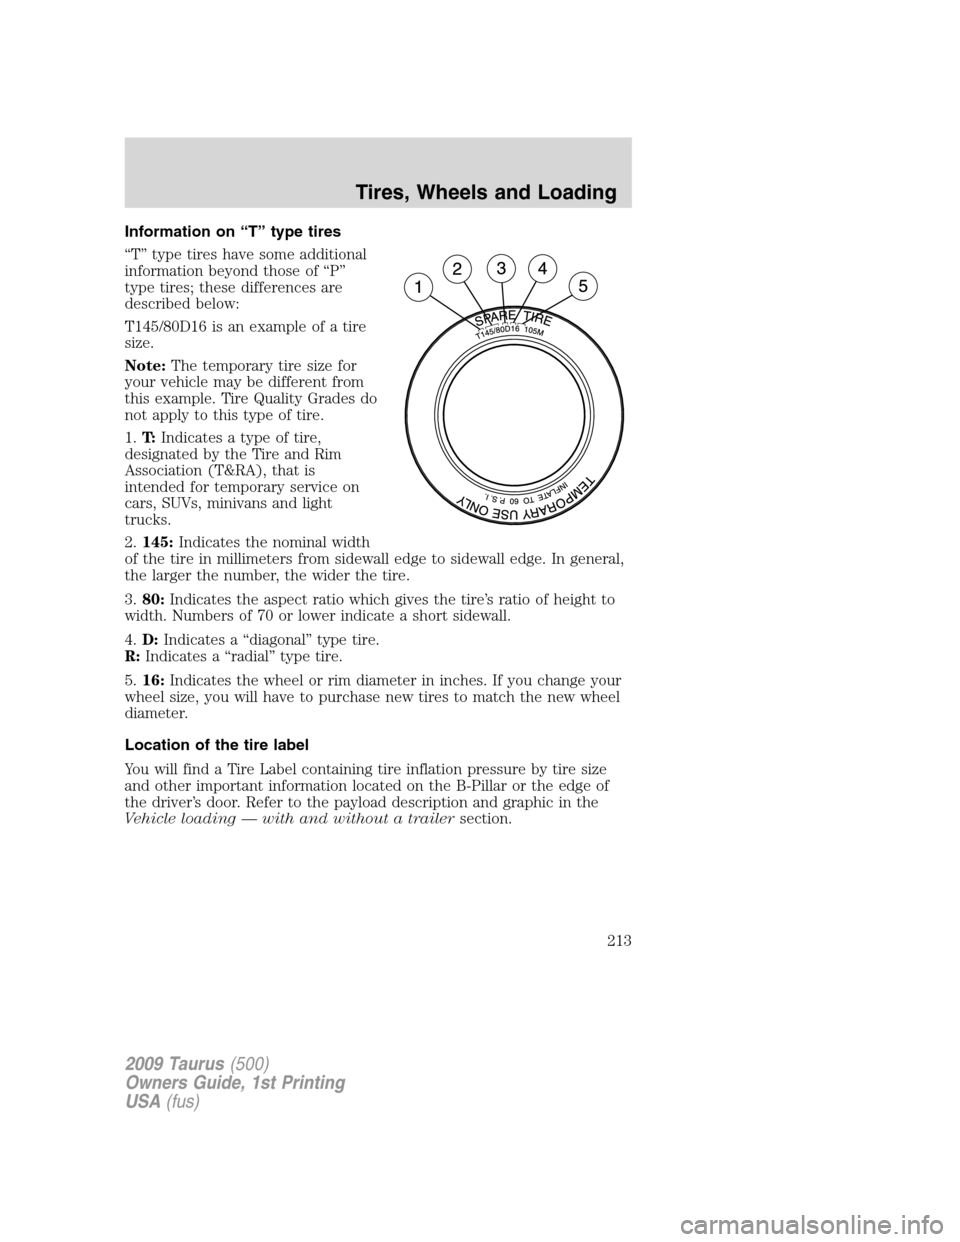 FORD TAURUS 2009 5.G User Guide Information on “T” type tires
“T” type tires have some additional
information beyond those of “P”
type tires; these differences are
described below:
T145/80D16 is an example of a tire
size